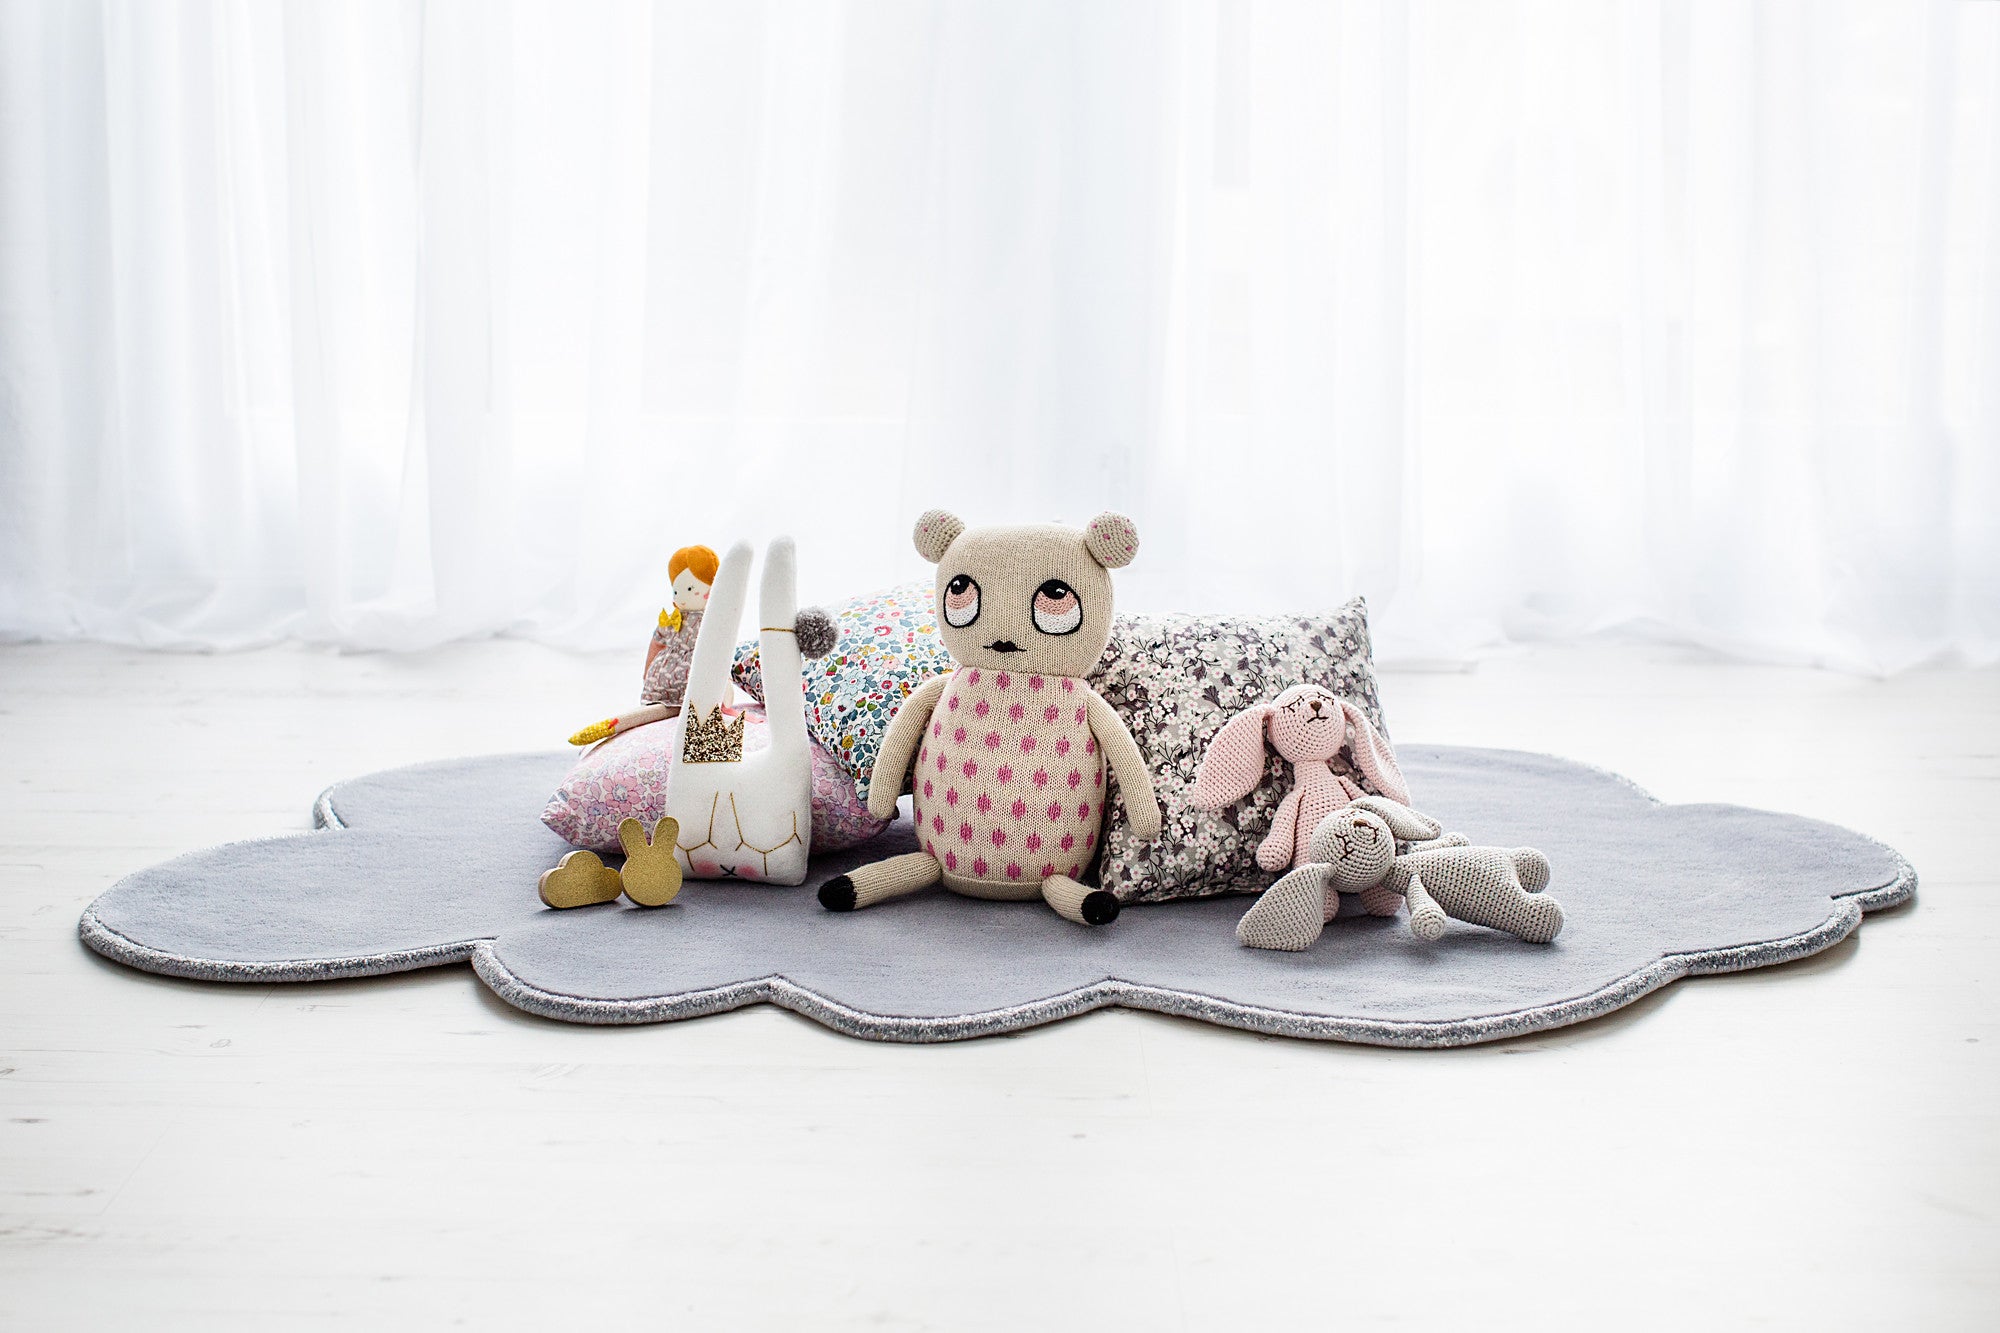 Children's room accessories and liberty prints, available at Bobby Rabbit.